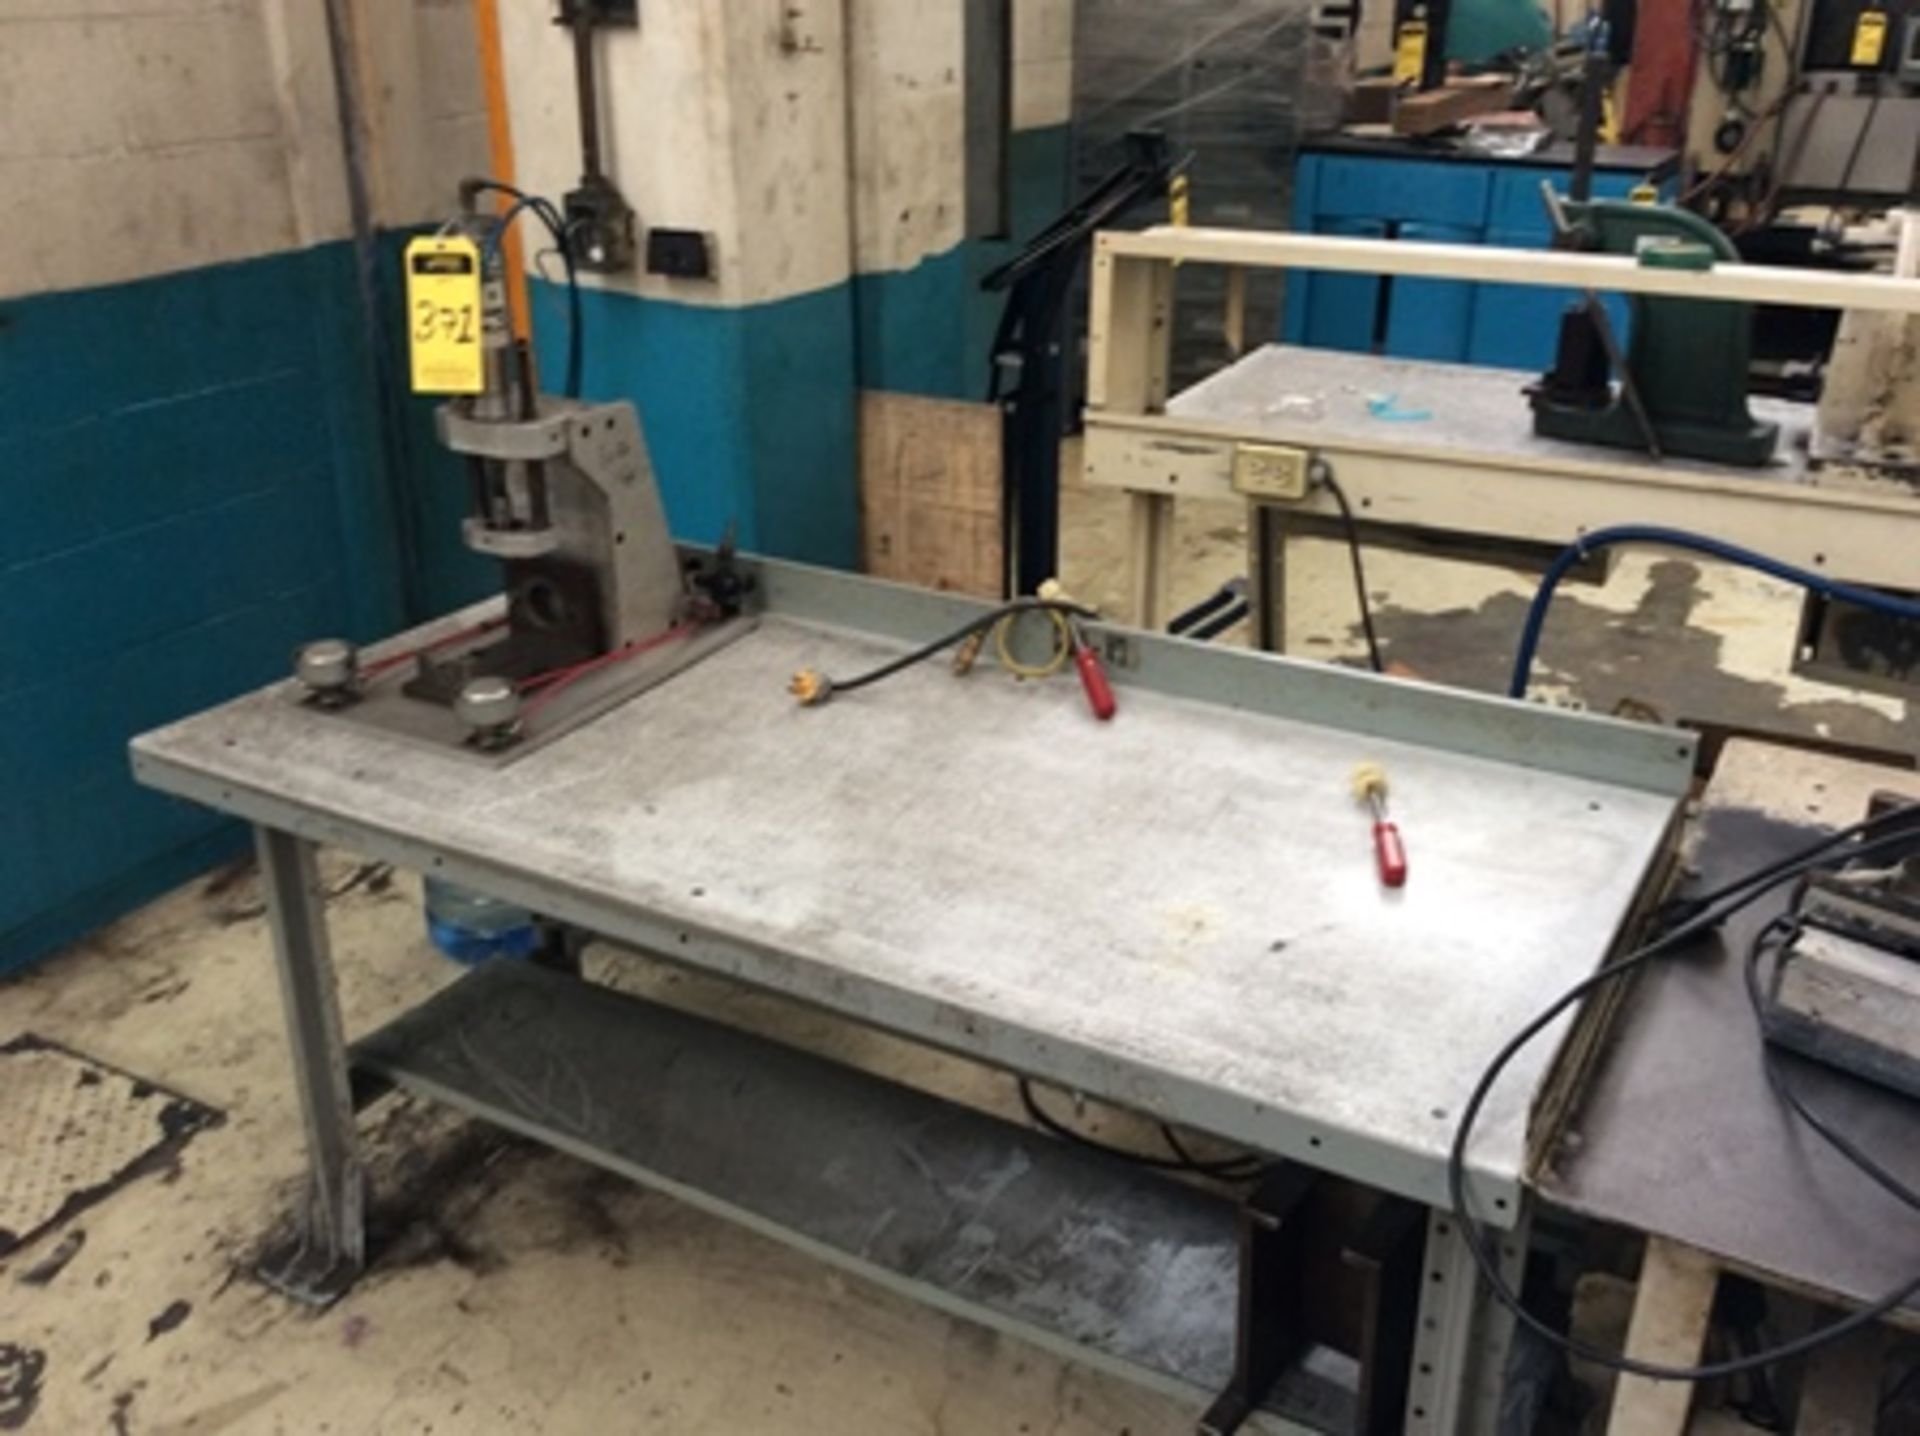 2 assembly tables, includes clamping device and tester, pneumatic press, Titan traysealer and co … - Image 6 of 8